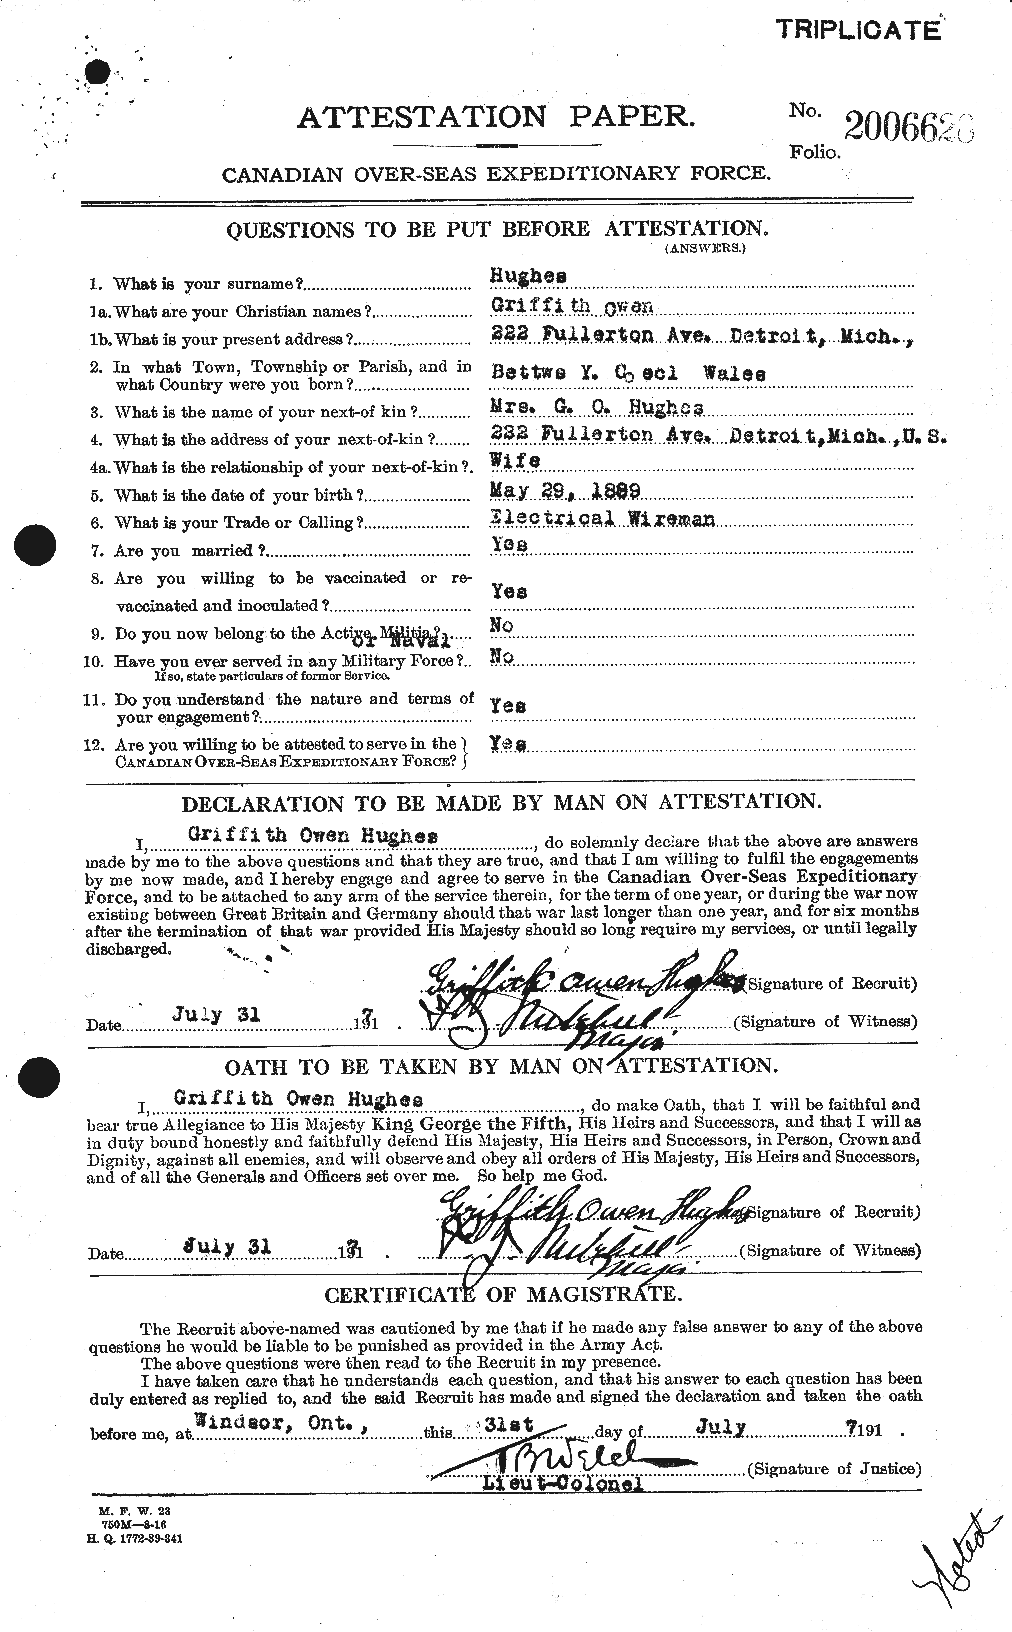 Personnel Records of the First World War - CEF 403853a